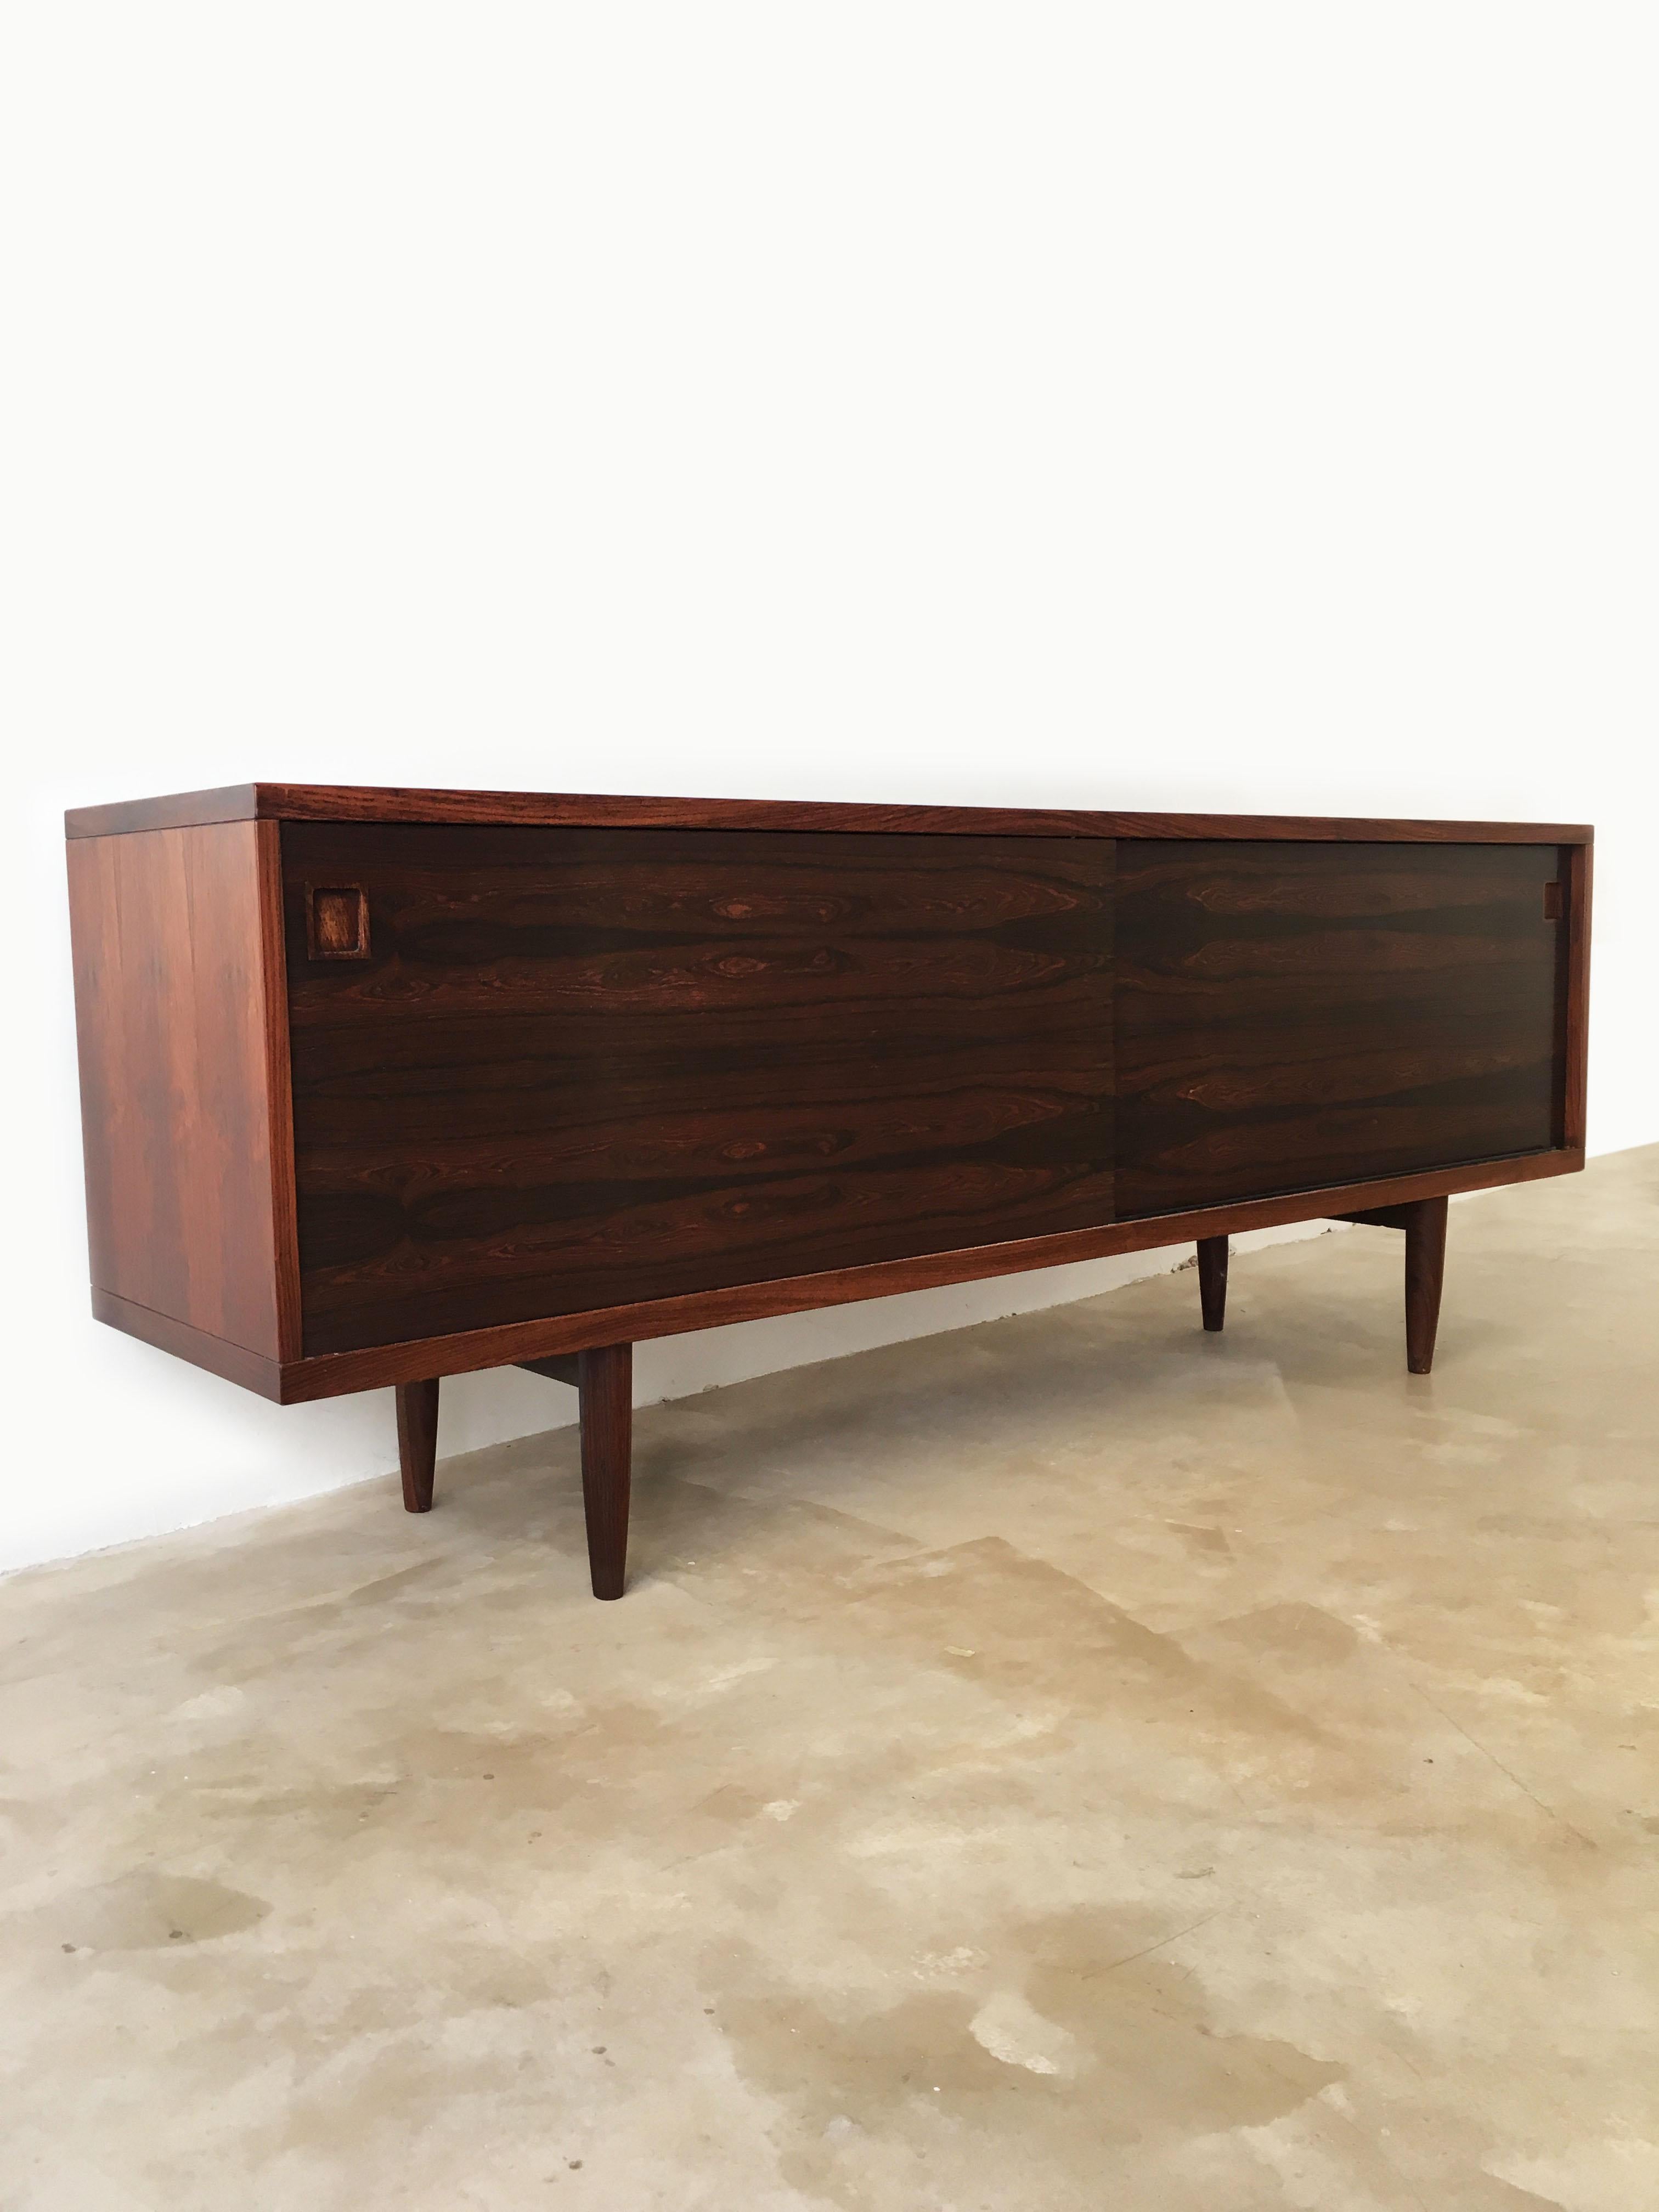 Rare Moller sideboard No 20 with book matched veneer, a noticed smooth design where the beautiful wood grain falls into focus on the two sliding doors. The top is carved in a soft curve around the edge, giving this piece an extra dimension that at